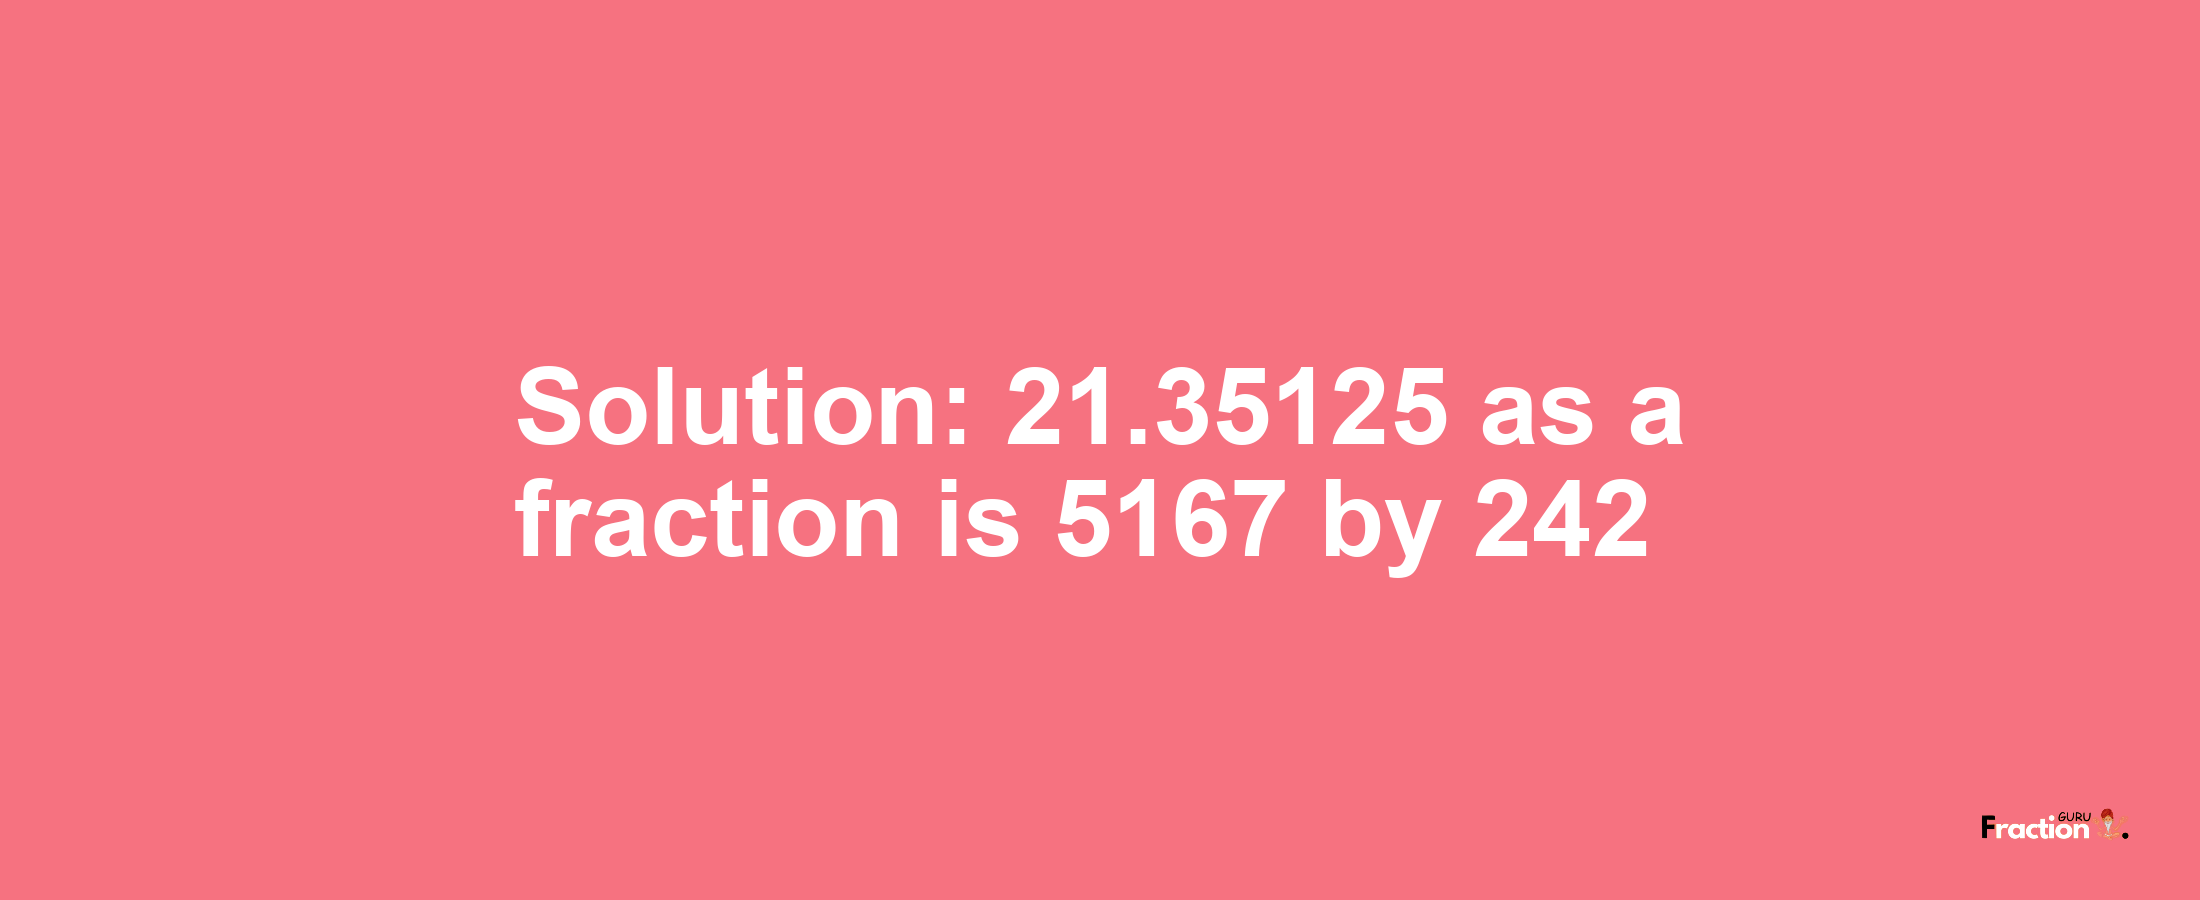 Solution:21.35125 as a fraction is 5167/242